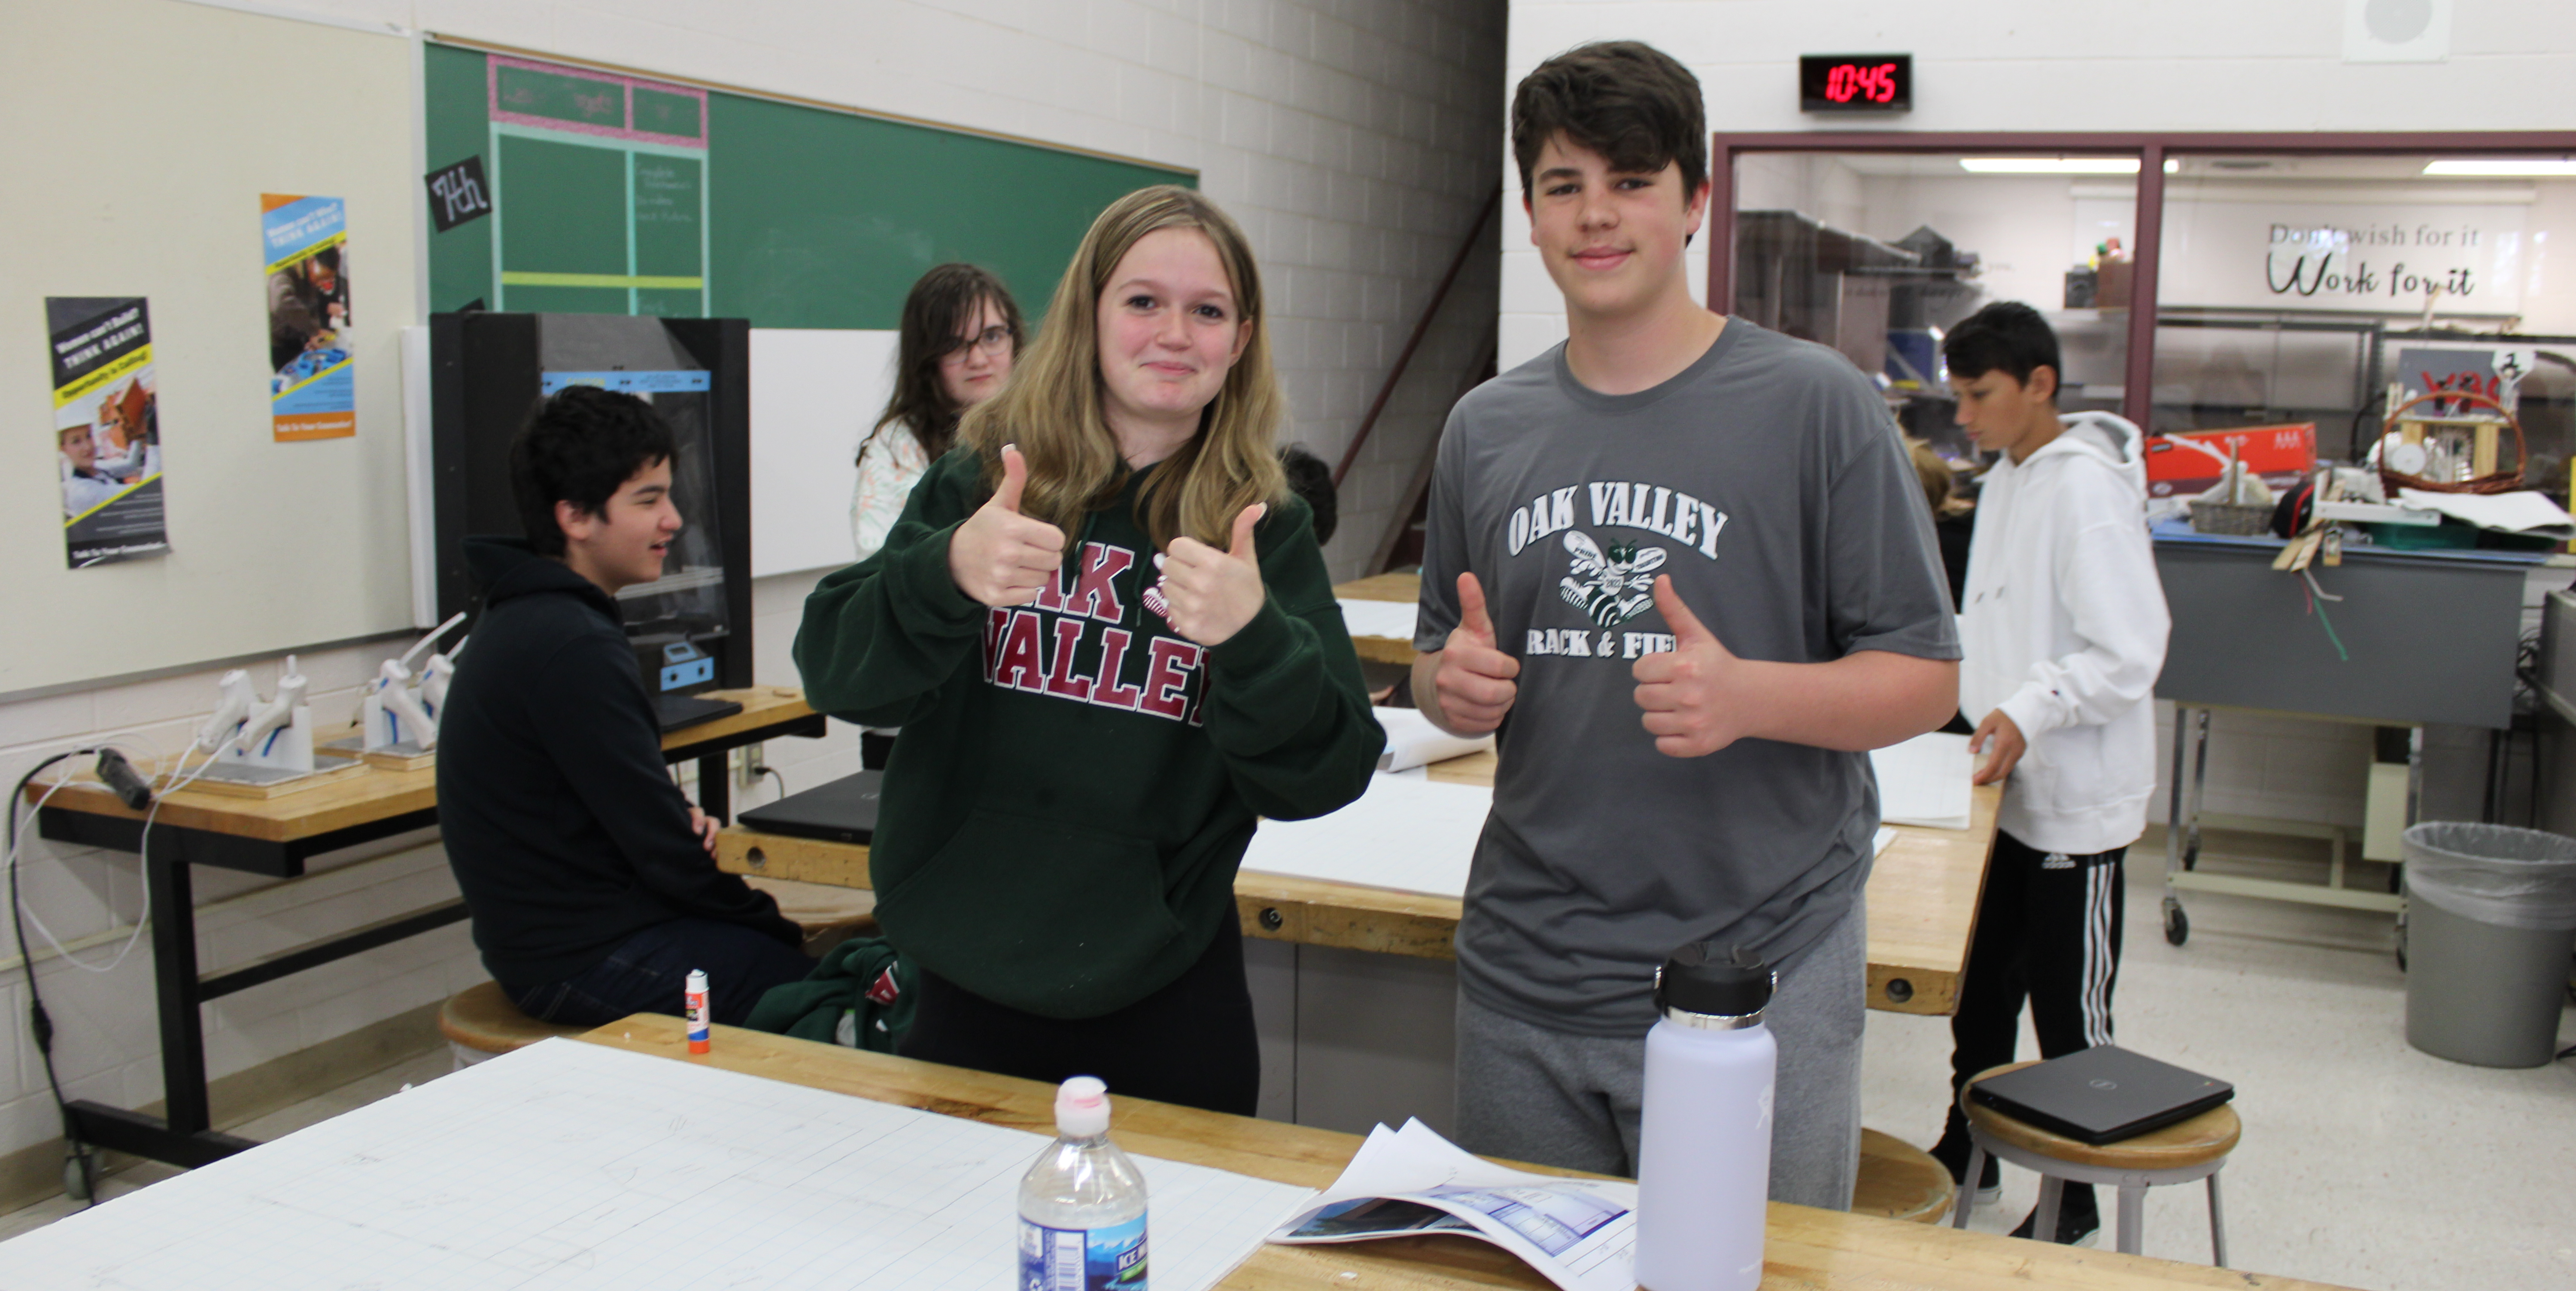 Students in engineering class giving thumbs up